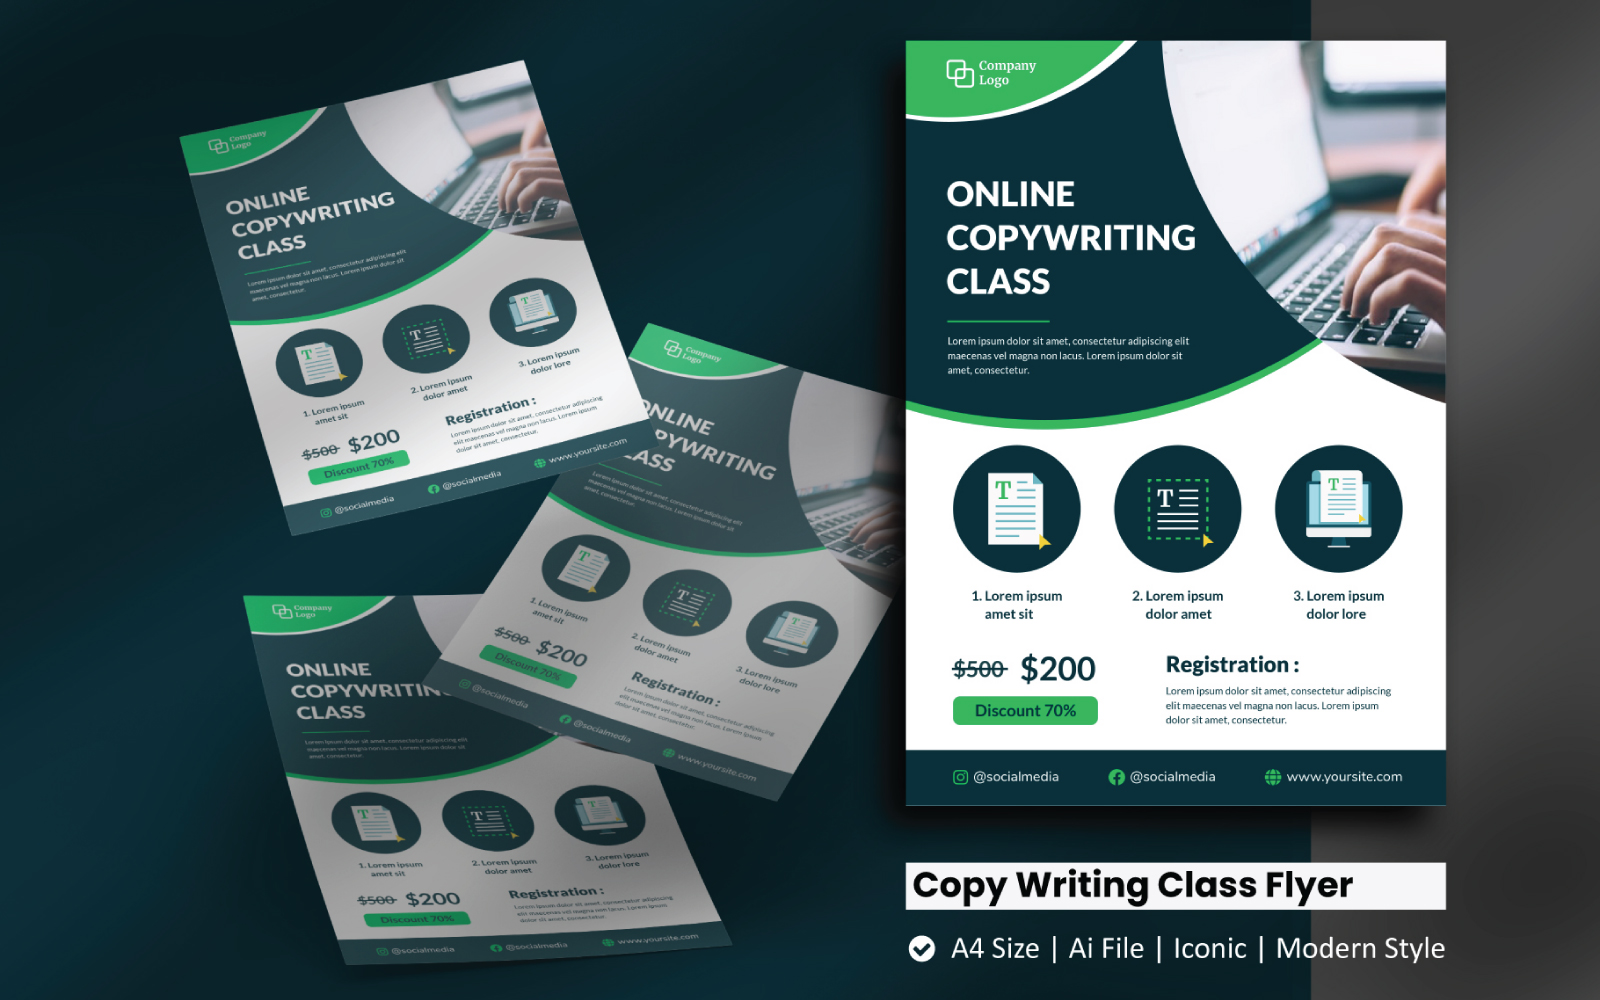 Online Copy Writing Class Flyer Corporate Identity Template